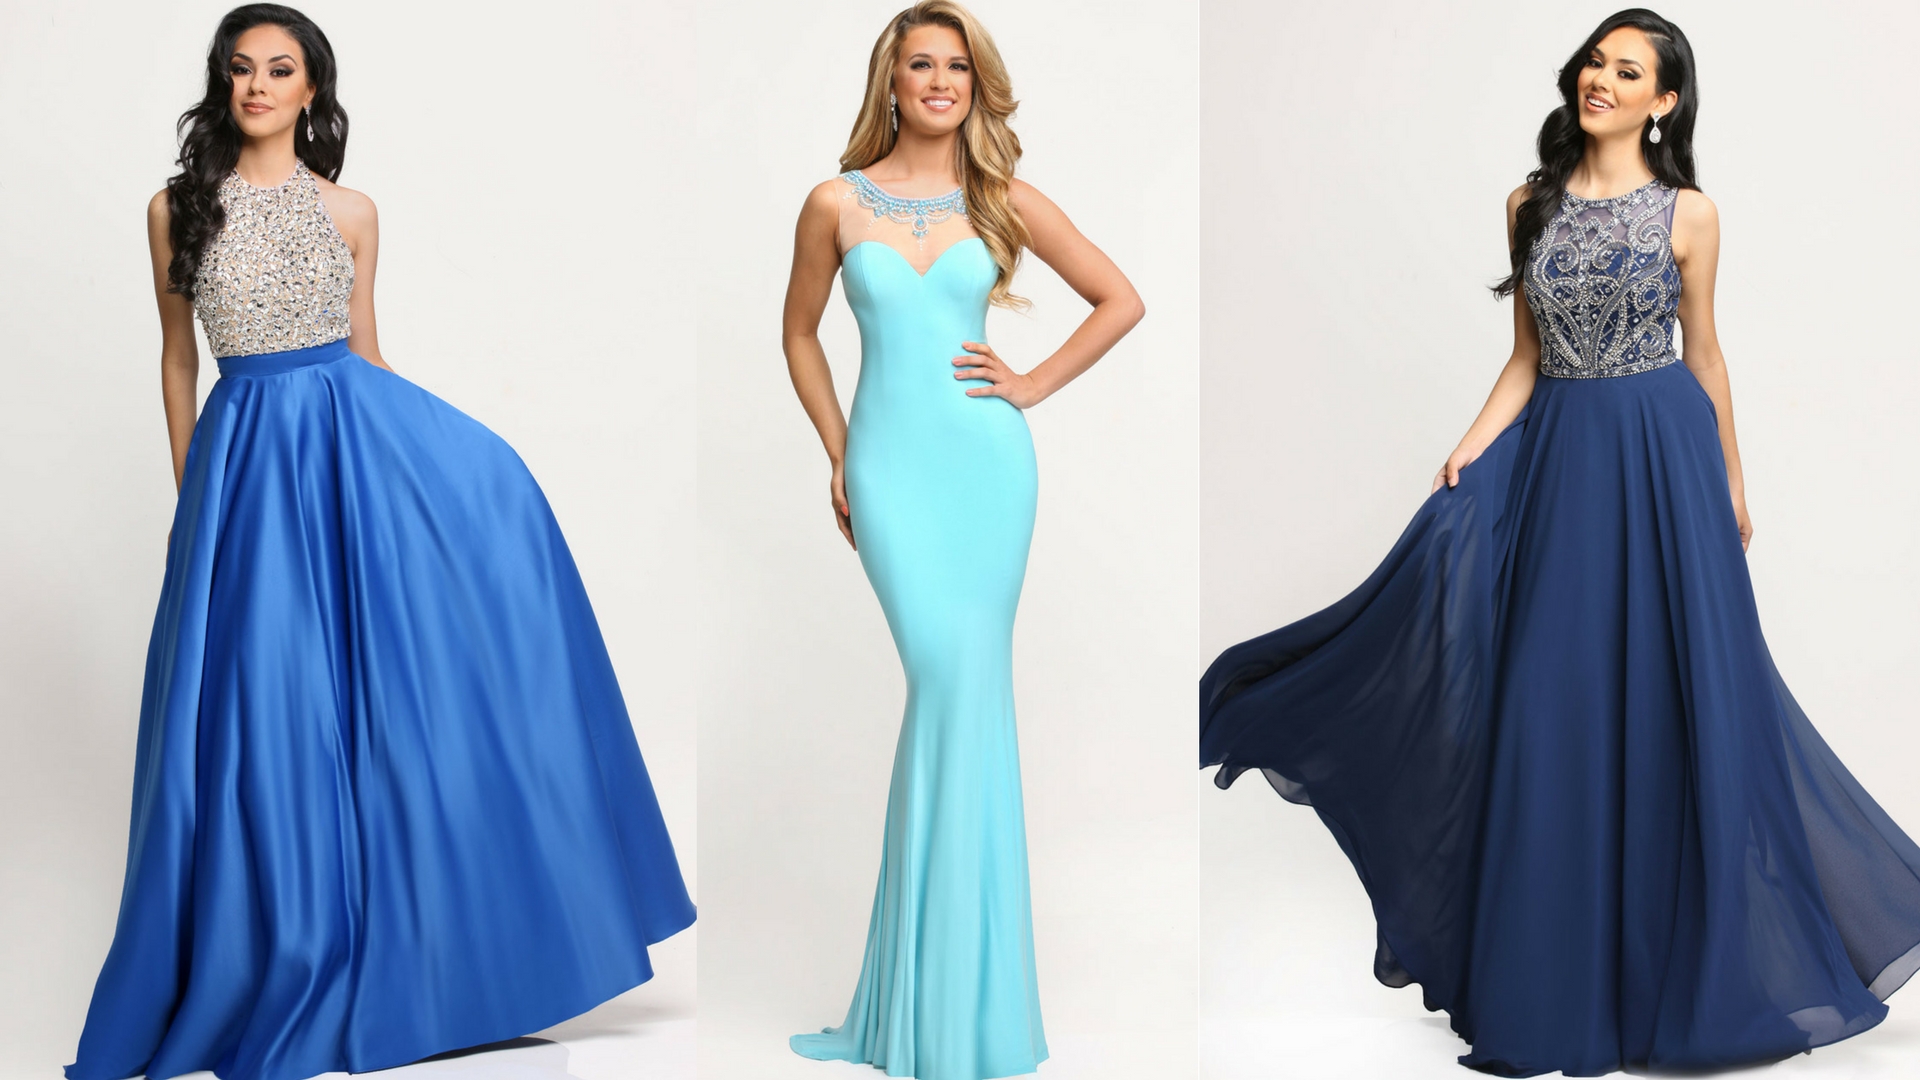 Beautiful in Blue: 9 Navy & Turquoise Gowns for Prom 2017